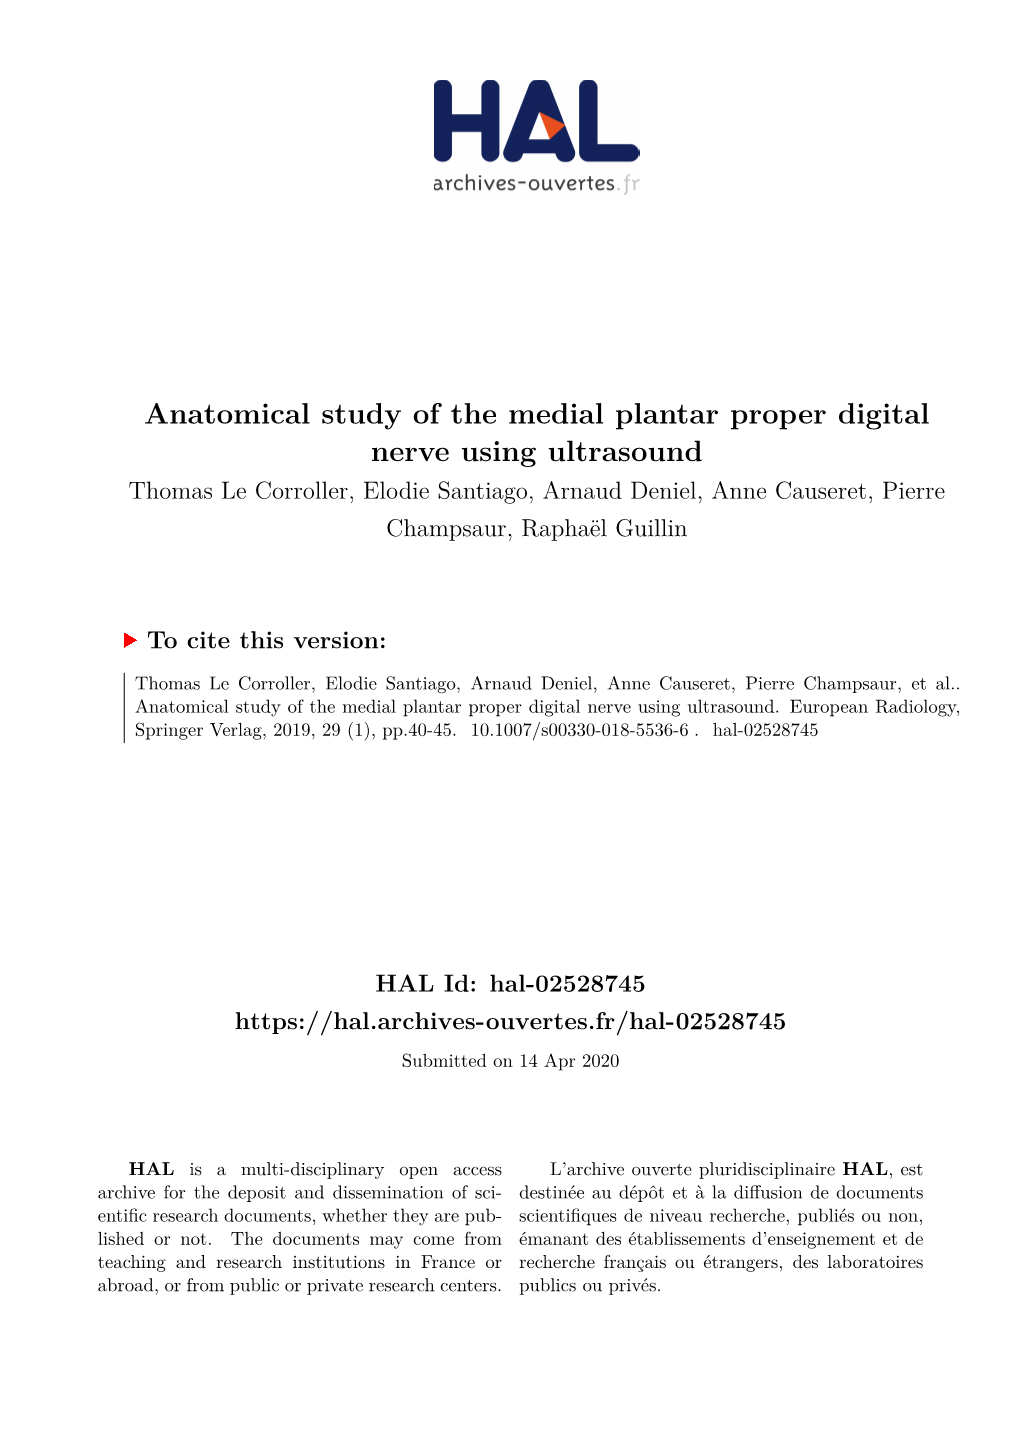 Anatomical Study of the Medial Plantar Proper